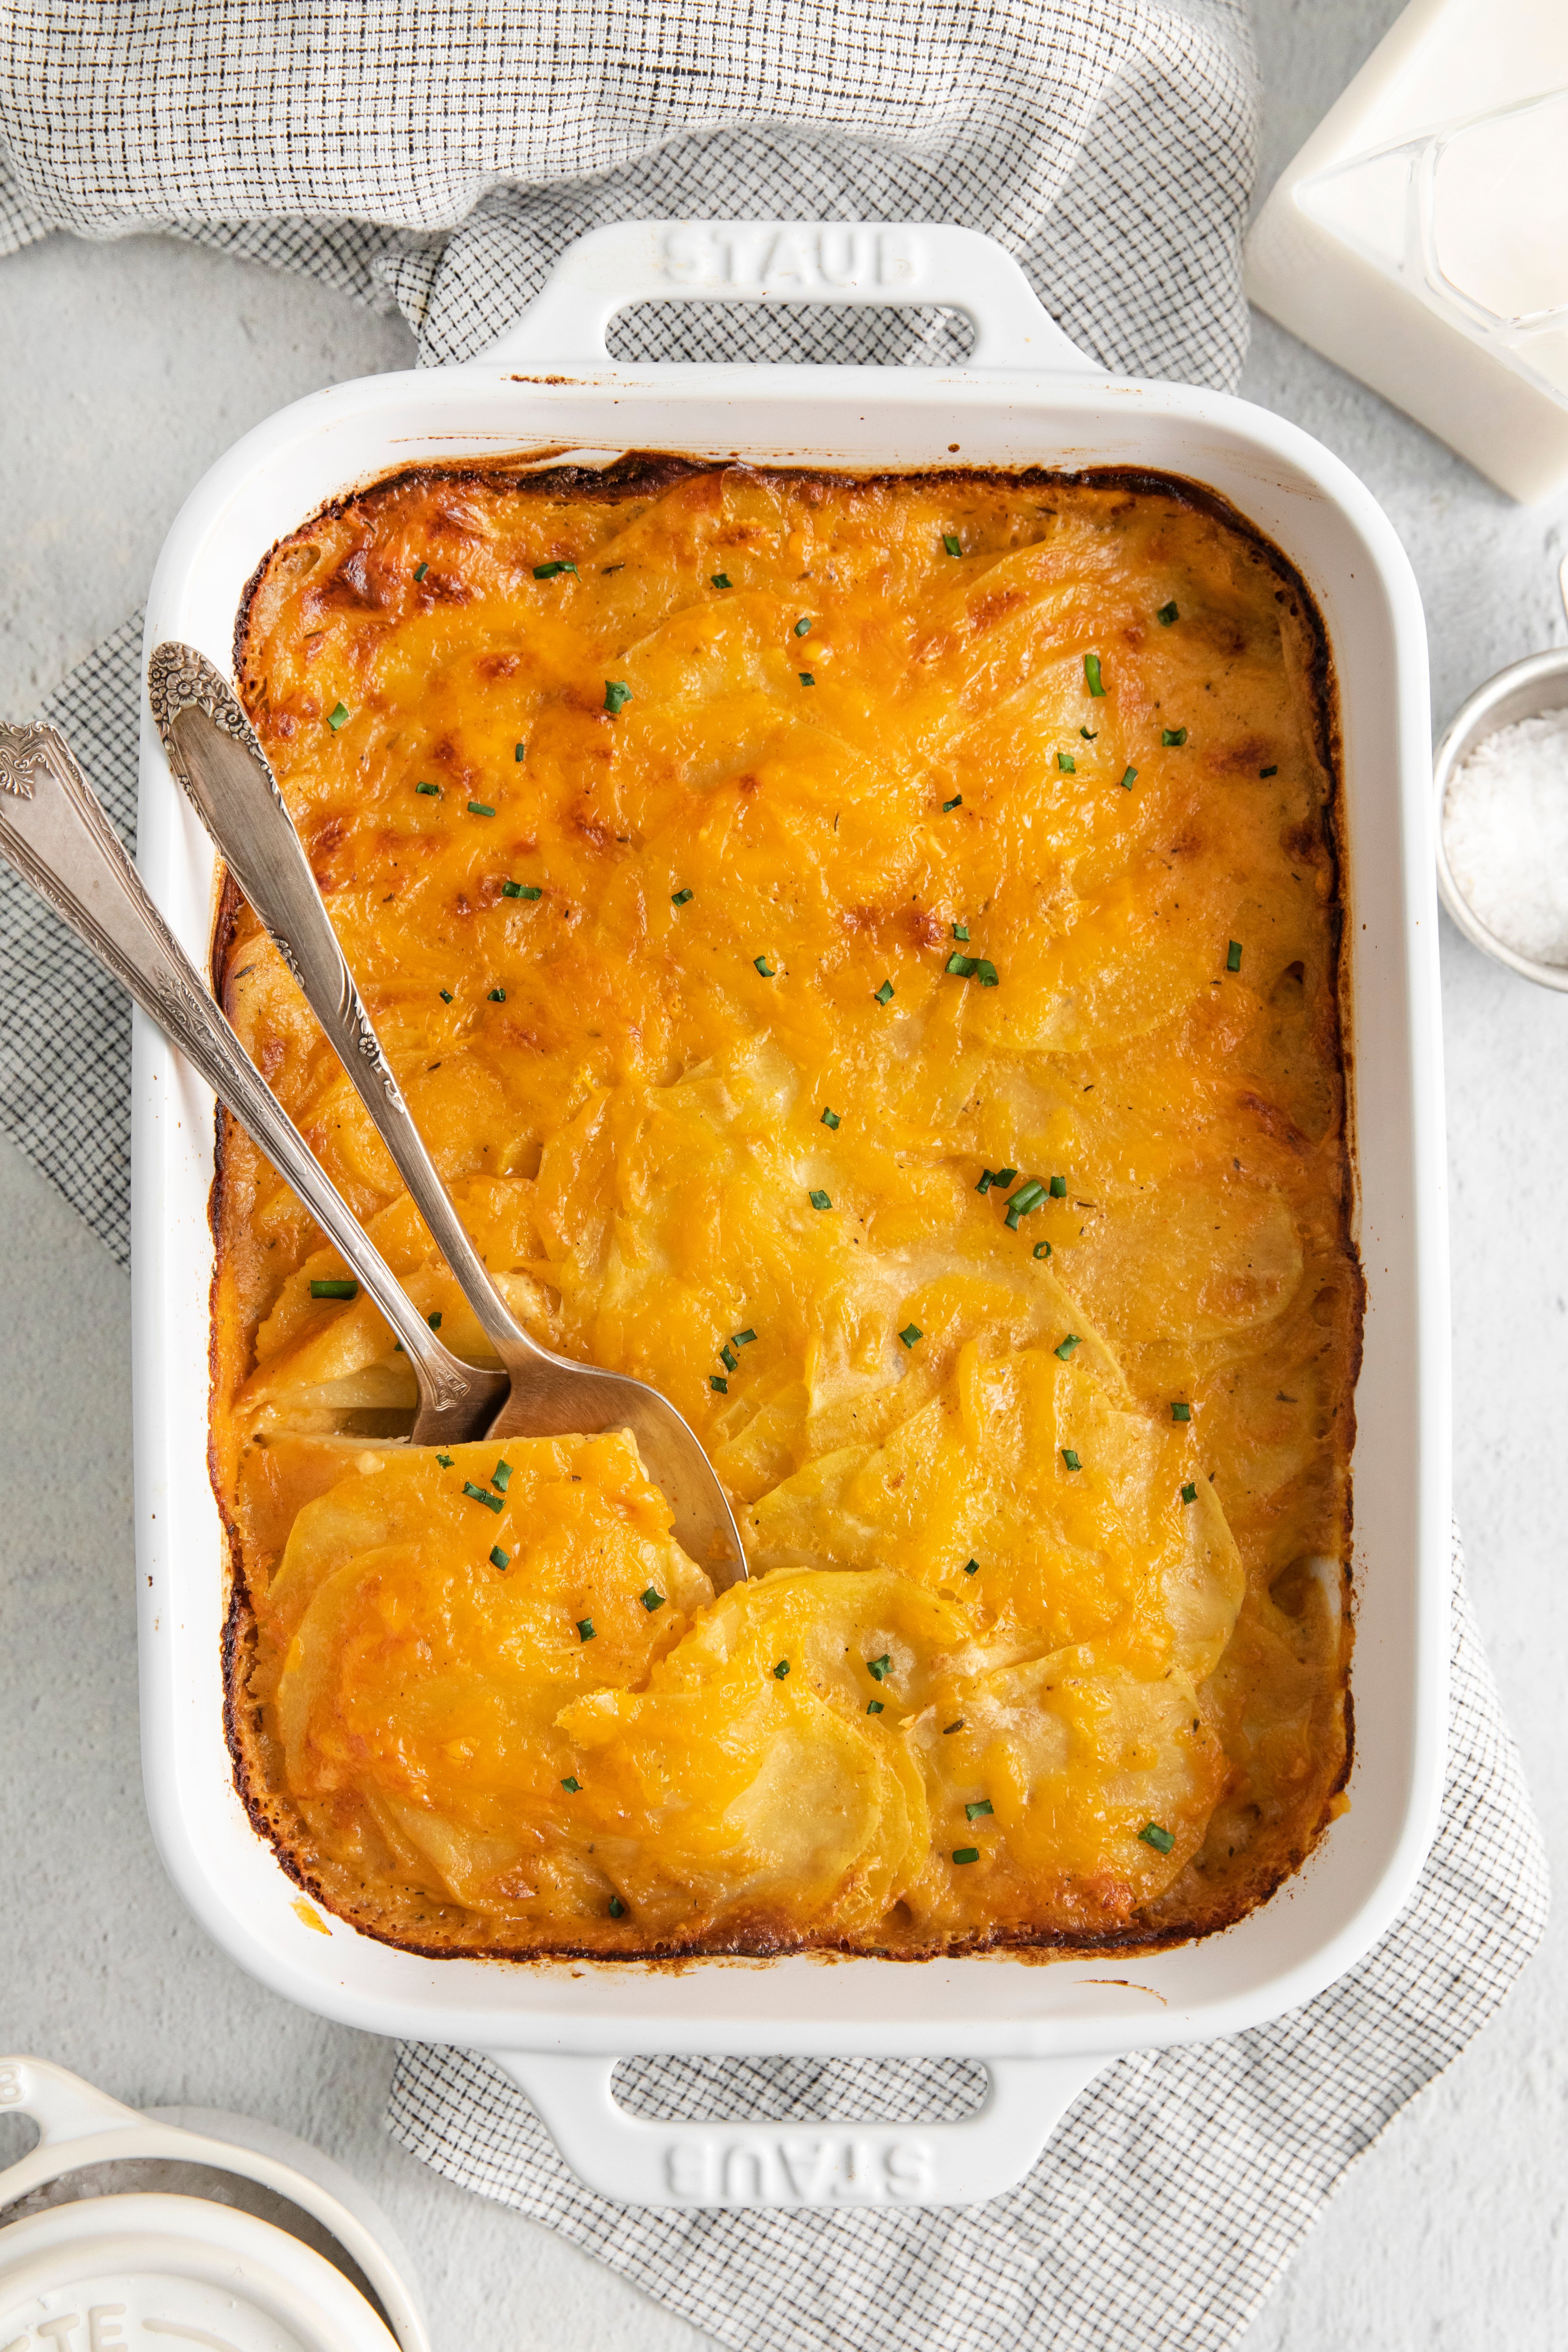 The Best Scalloped Potato Recipe You've Ever Had!